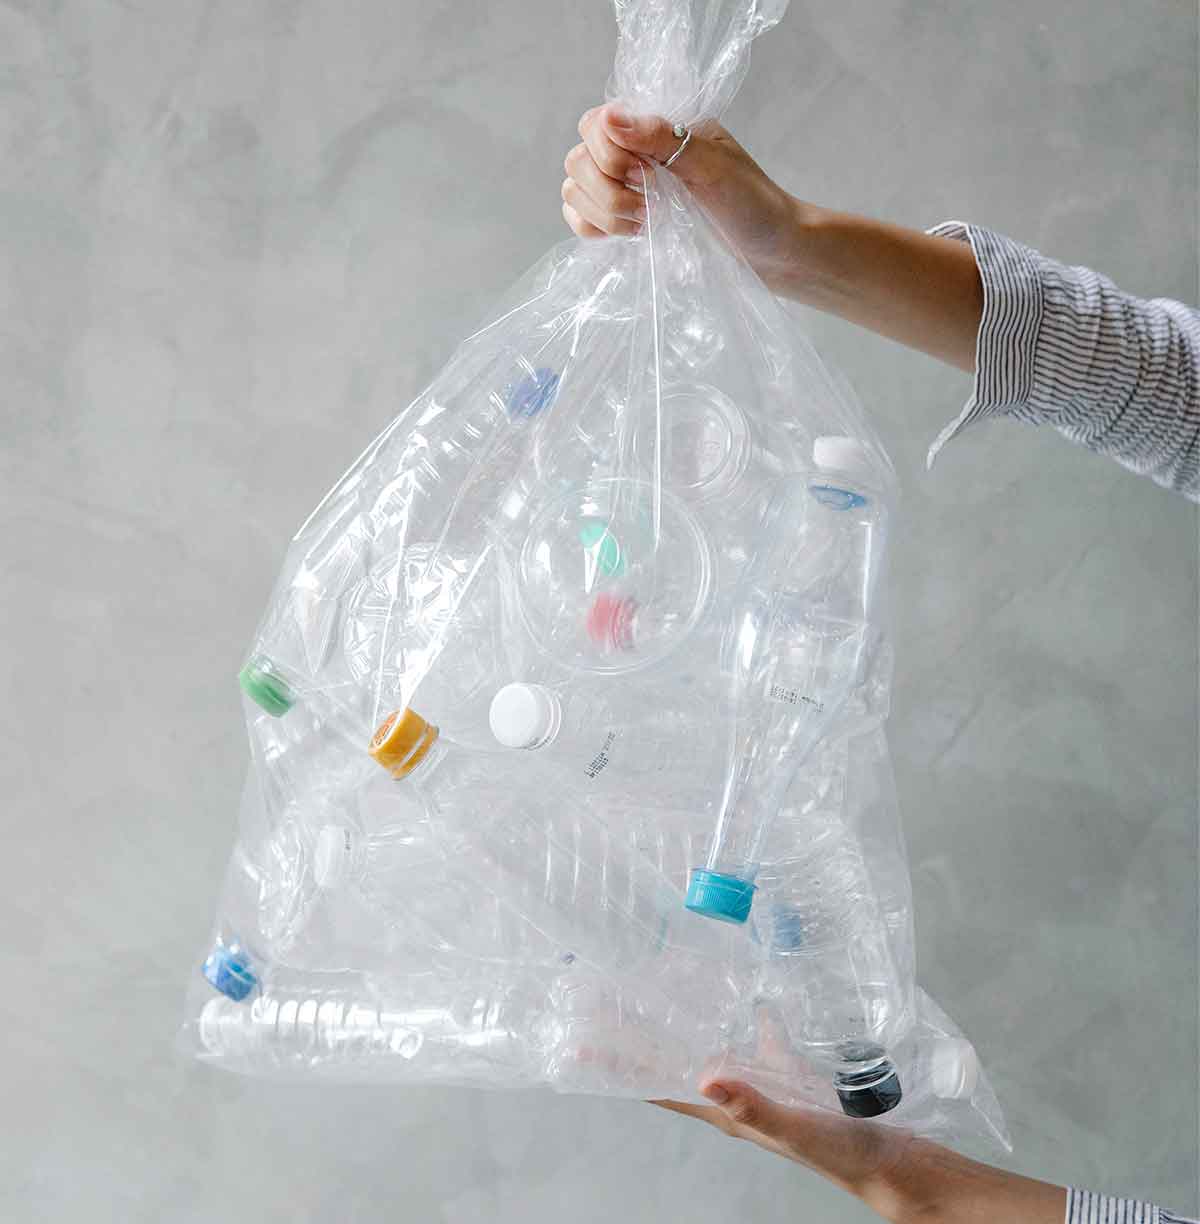 Women's hands holding a clear garbage bag with recyclable bottles.